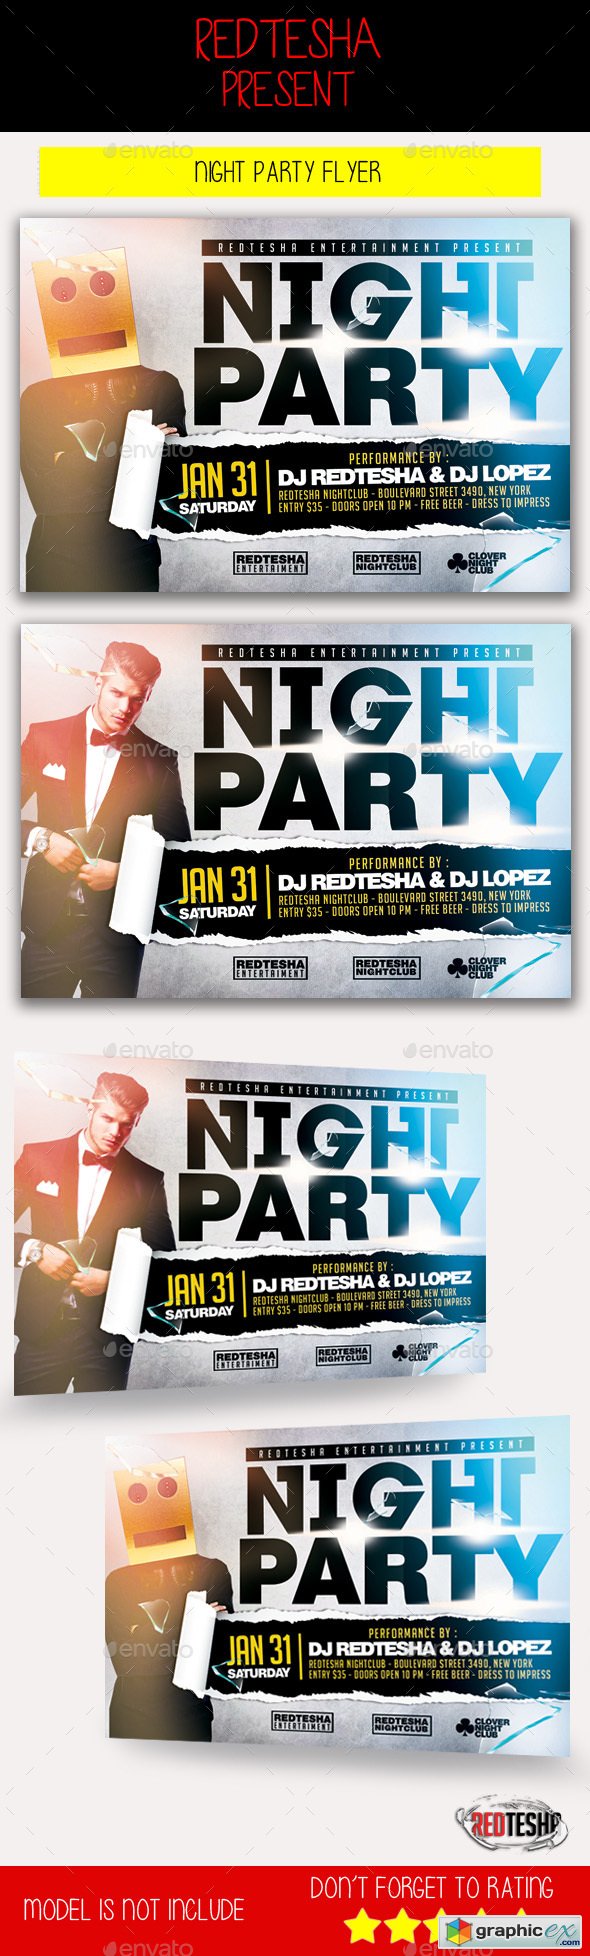 Night Party Flyer 14218315